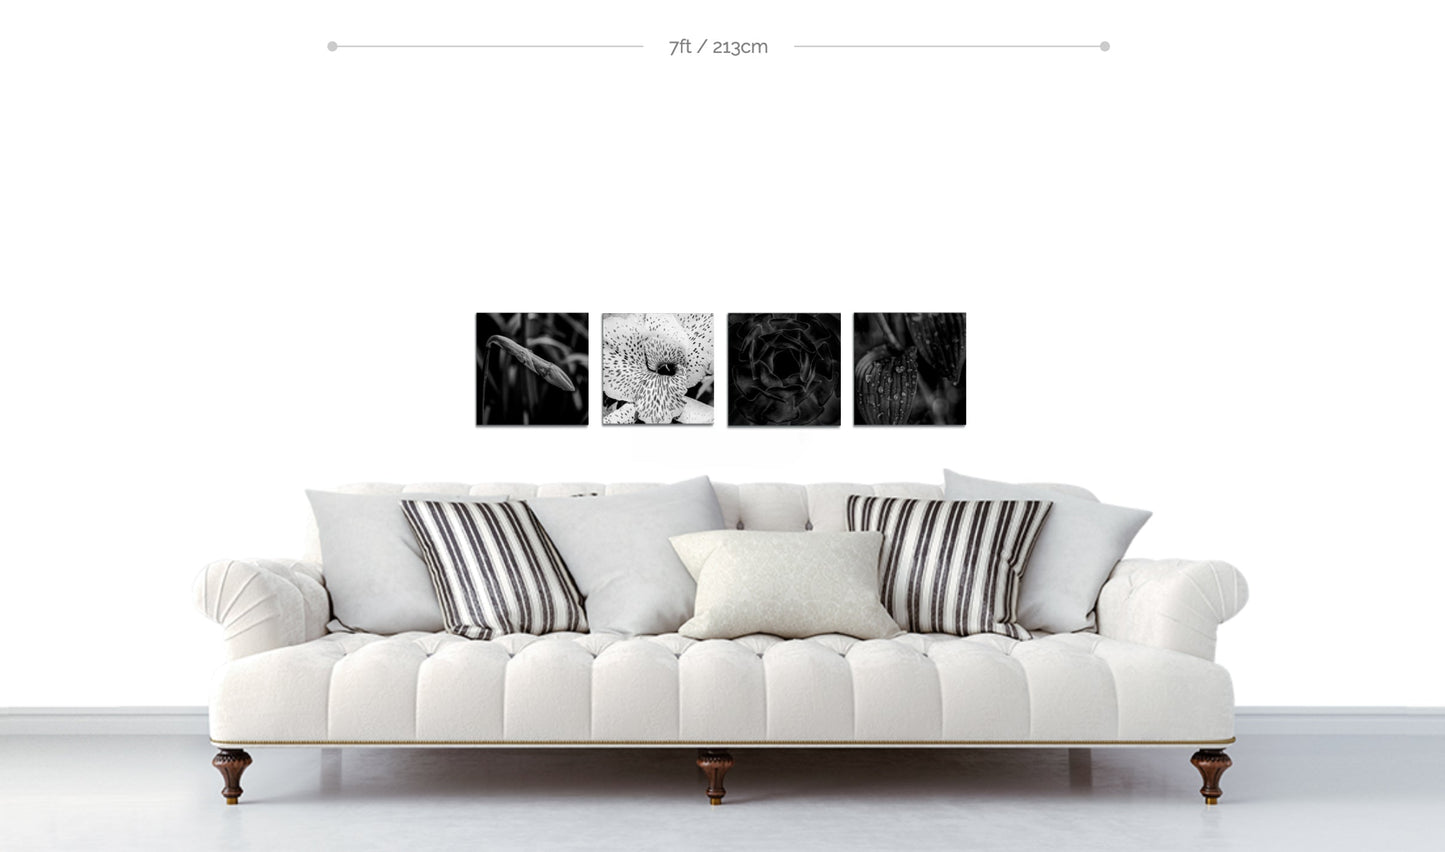 Metal flower wall decor set example four flower prints arranged in row above sofa Square Roots Series Two